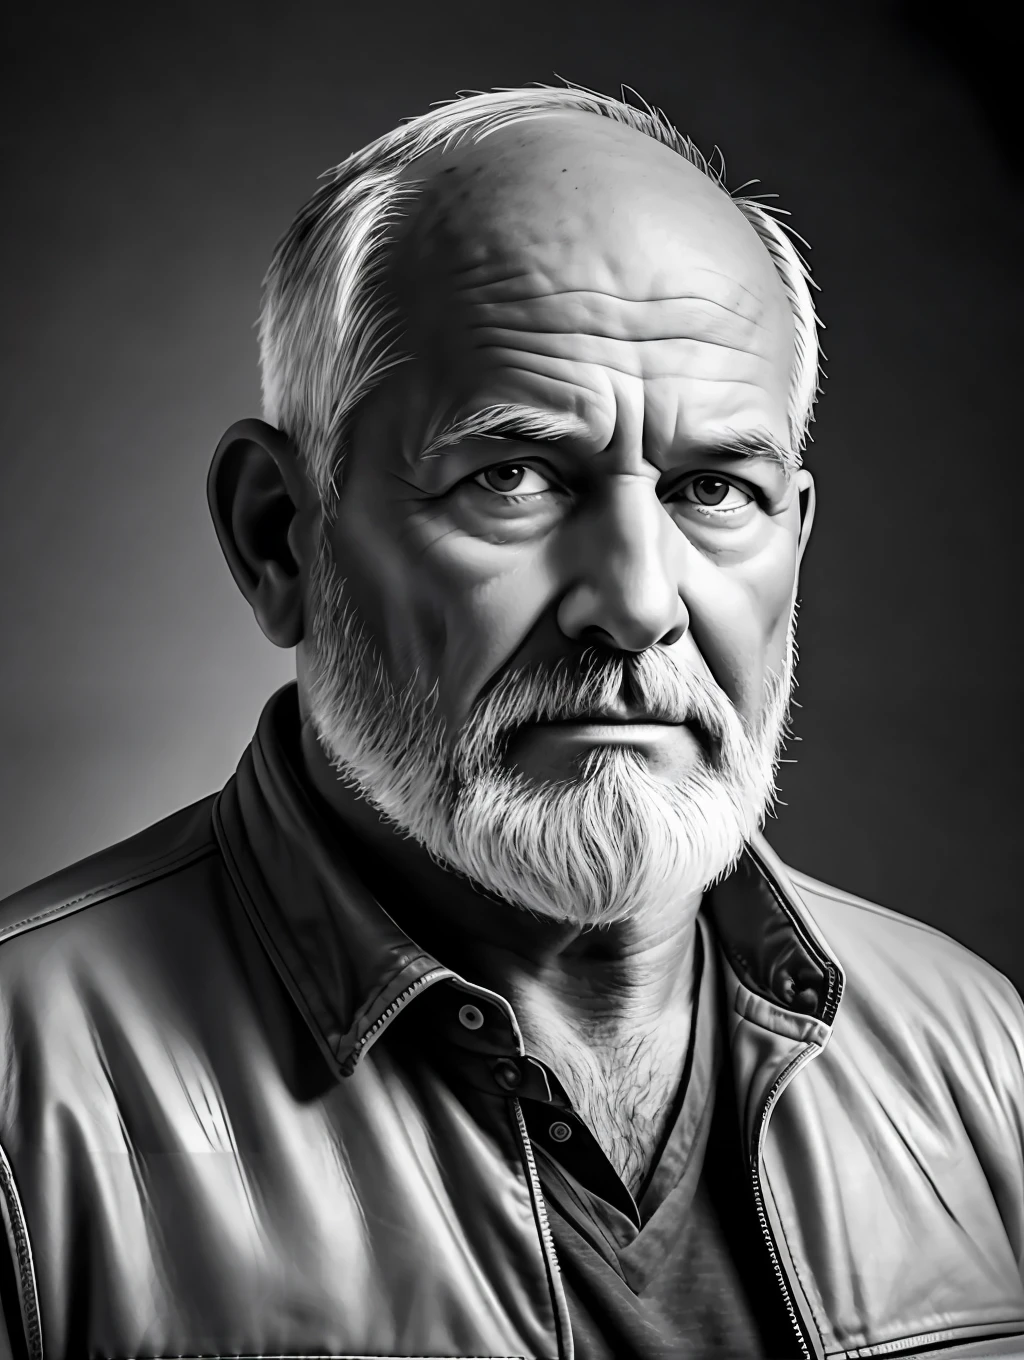 B&w portrait of a middle-aged man, detailed skin face, expression wrinkles, lumberjack style gray beard, raw beige leather jacket, white T-shirt without print, stiff countenance. Ultra detailed scene, dslr camera with 50mm Lens, soft studio lighting, ((vignette))